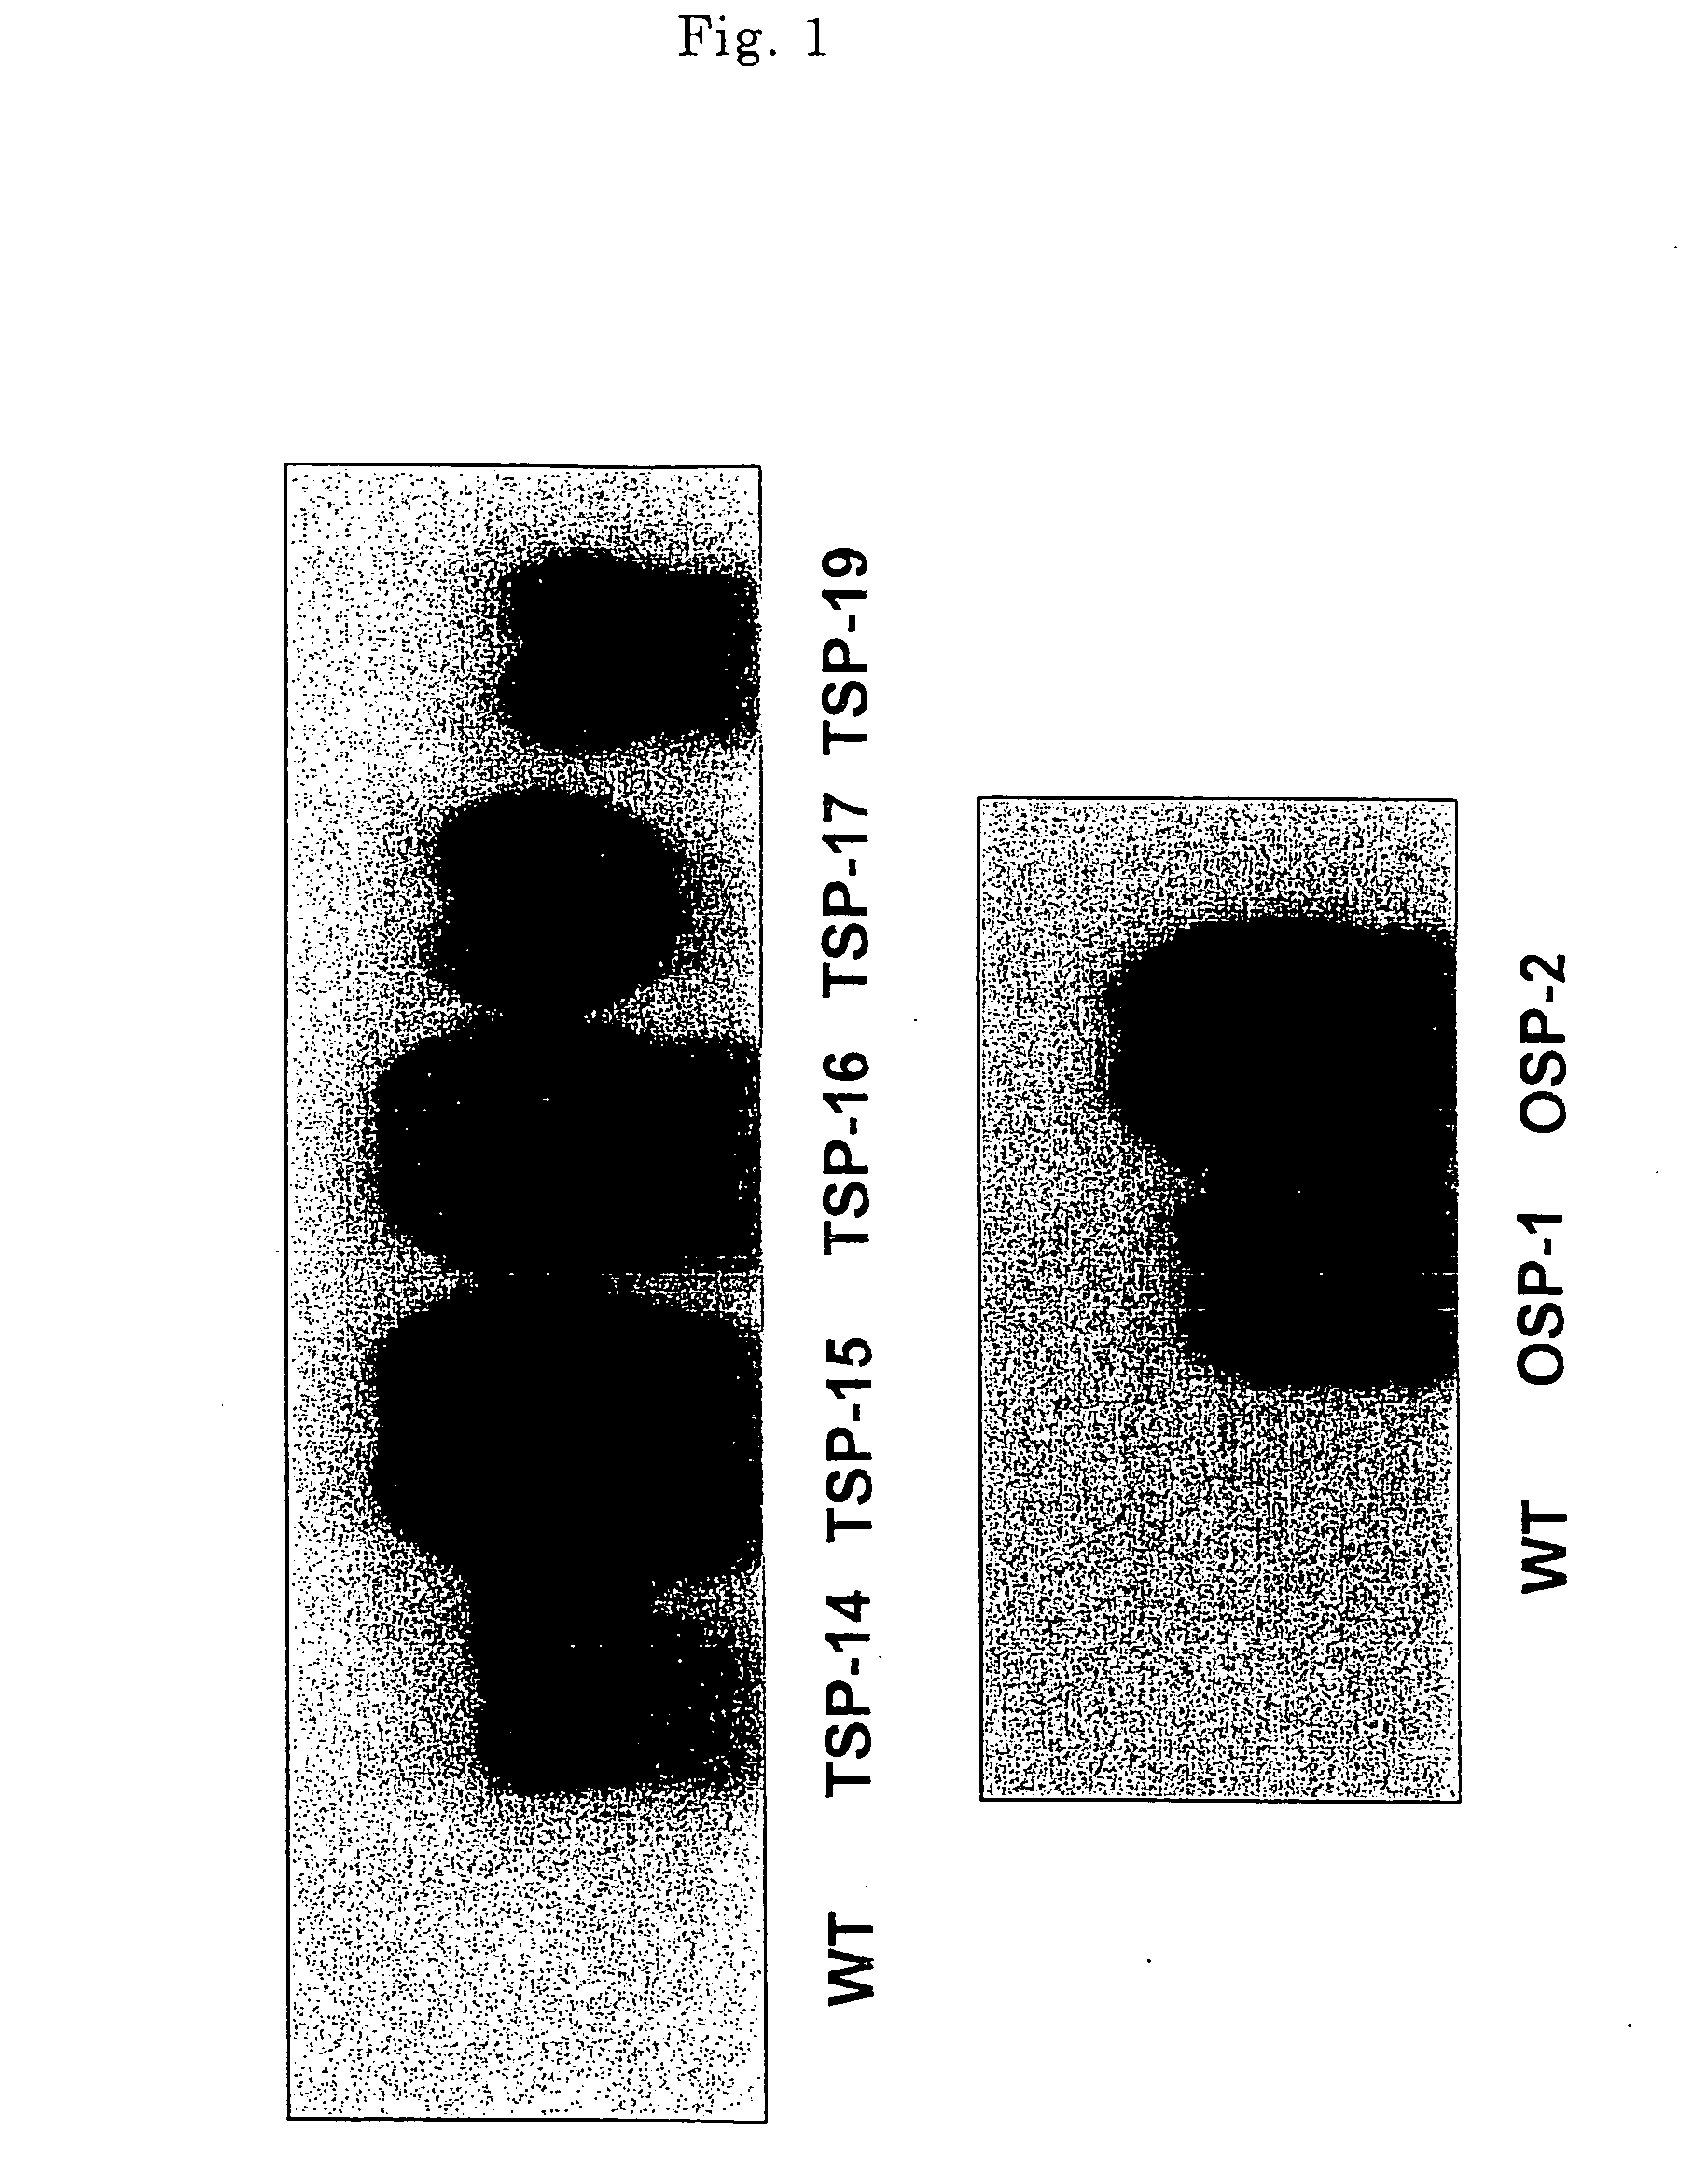 Method for increasing expression of stress defense genes